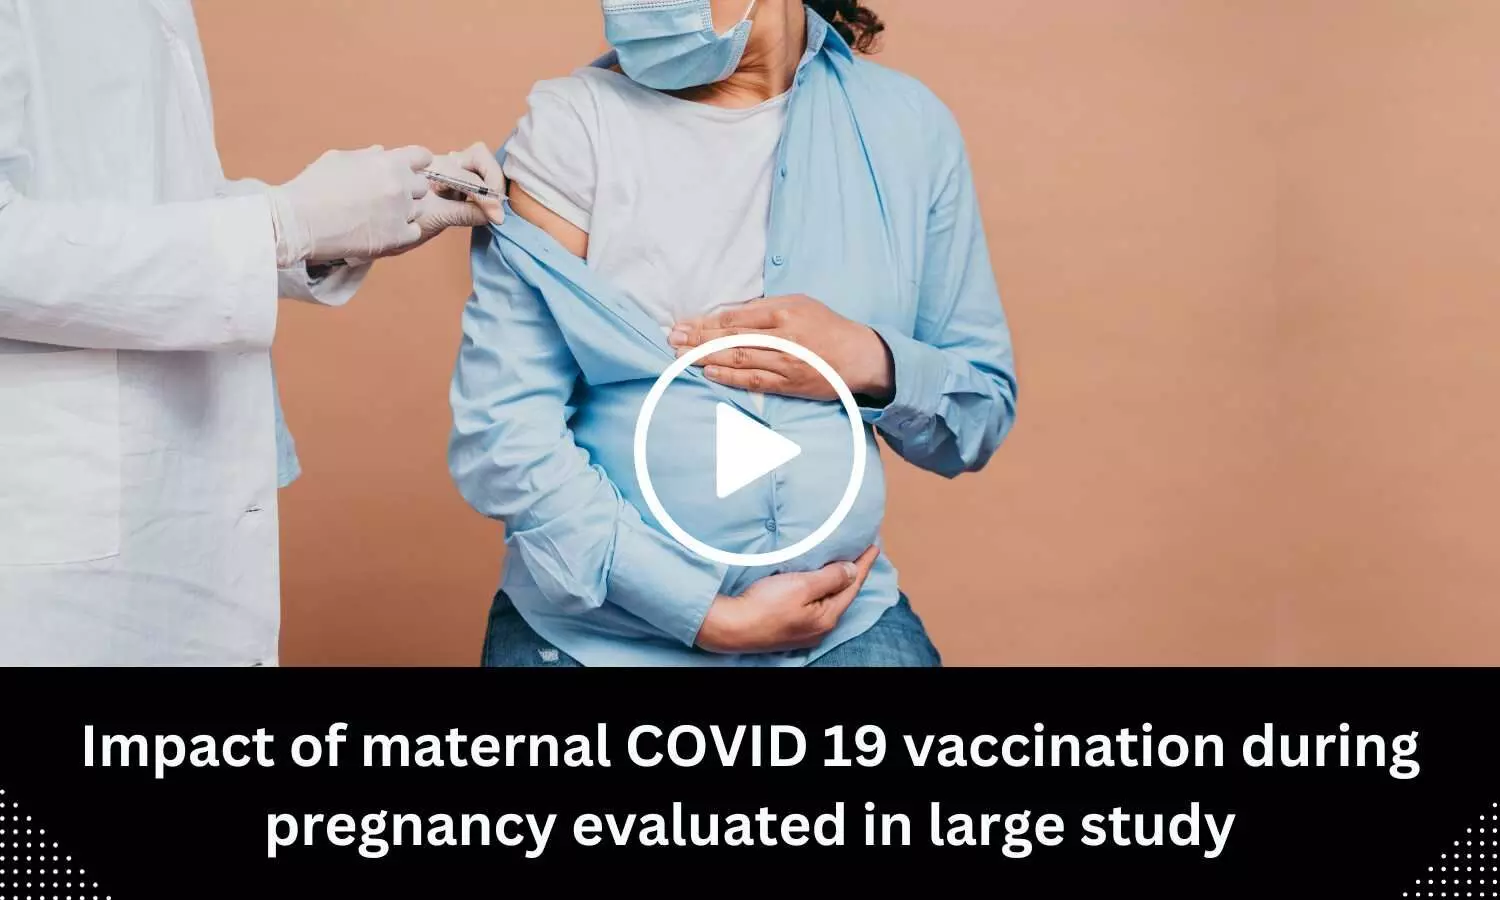 Impact of maternal COVID 19 vaccination during pregnancy evaluated in large study